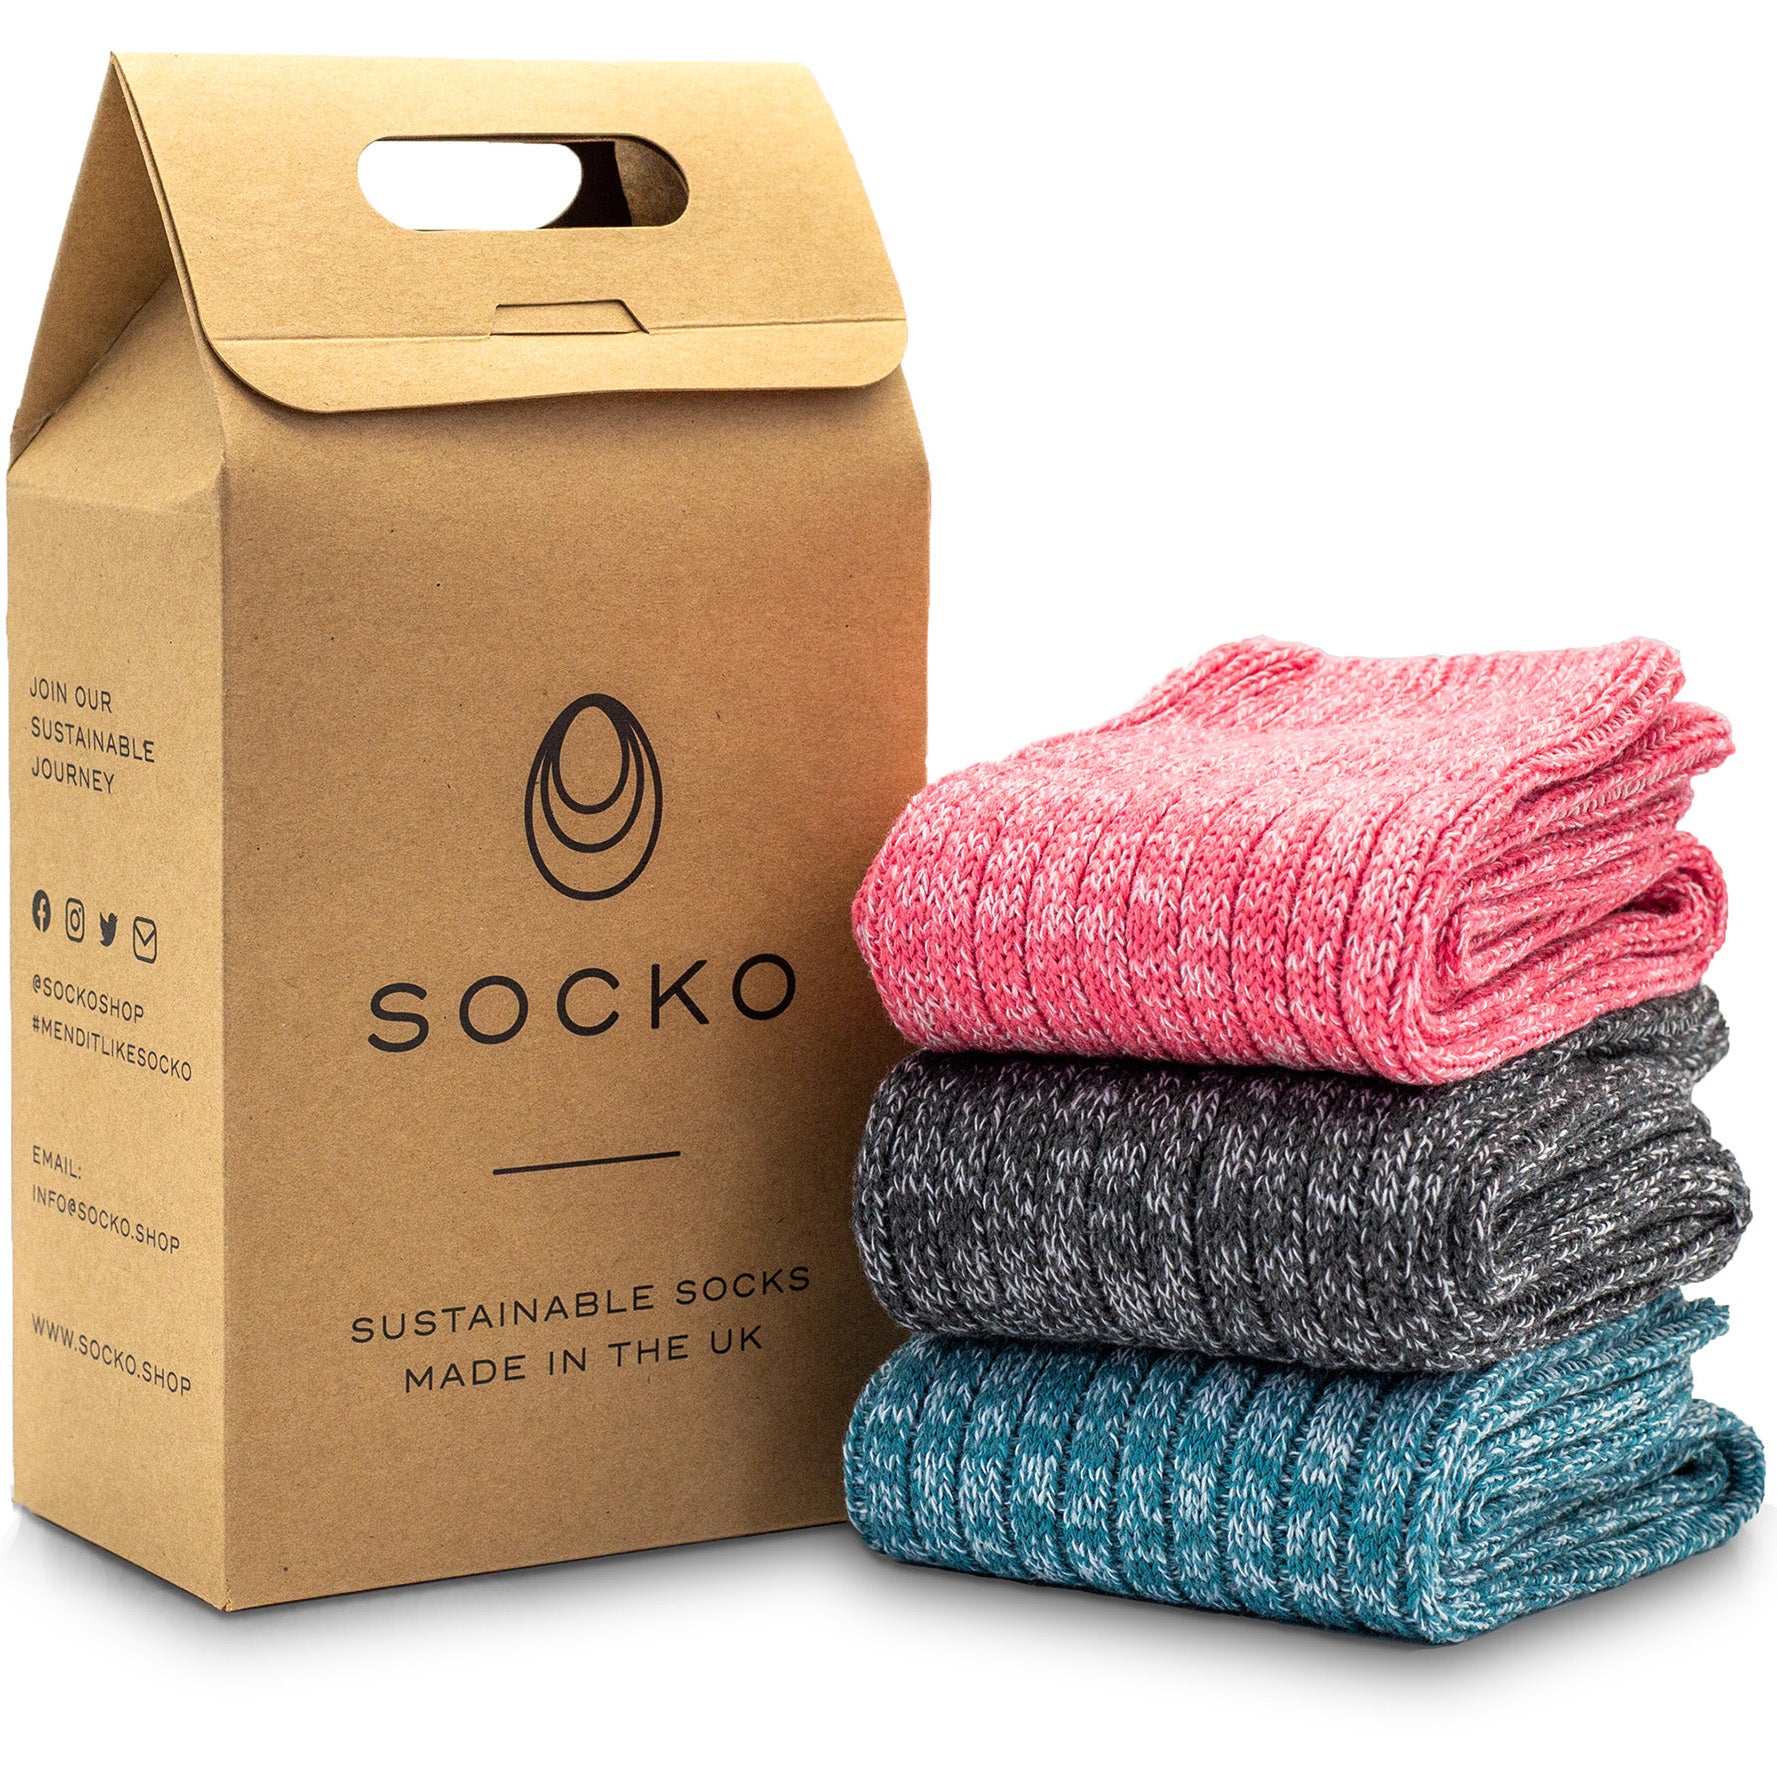 Socko - Sustainable socks made in the UK